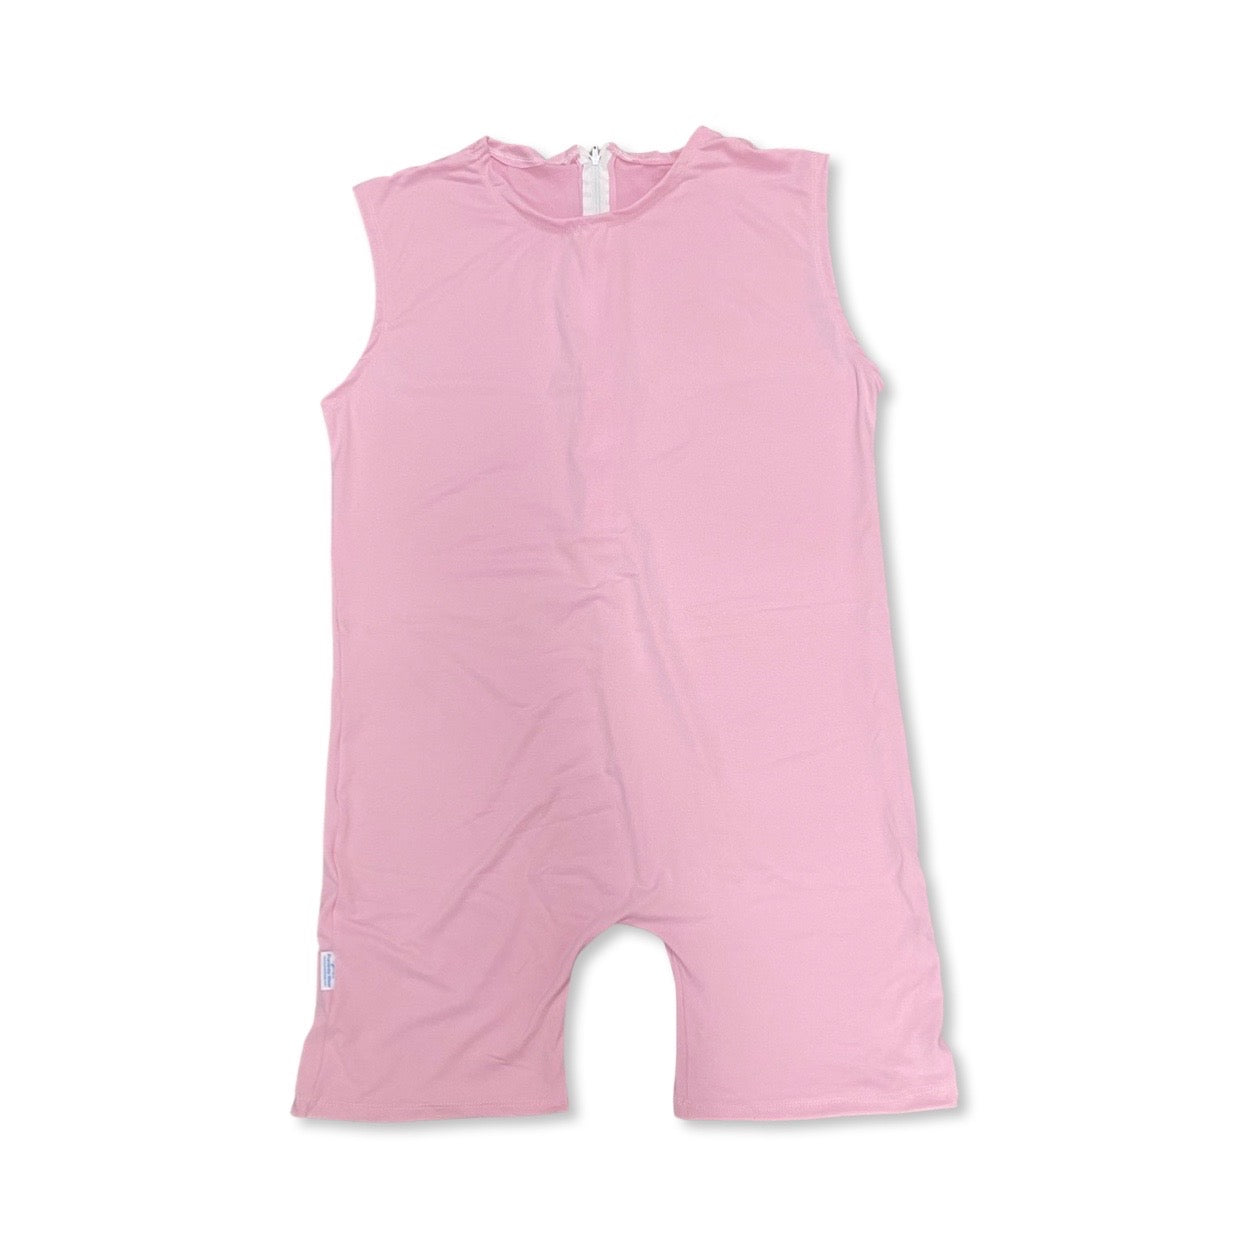 A pink romper with a white collar, perfect for a baby girl